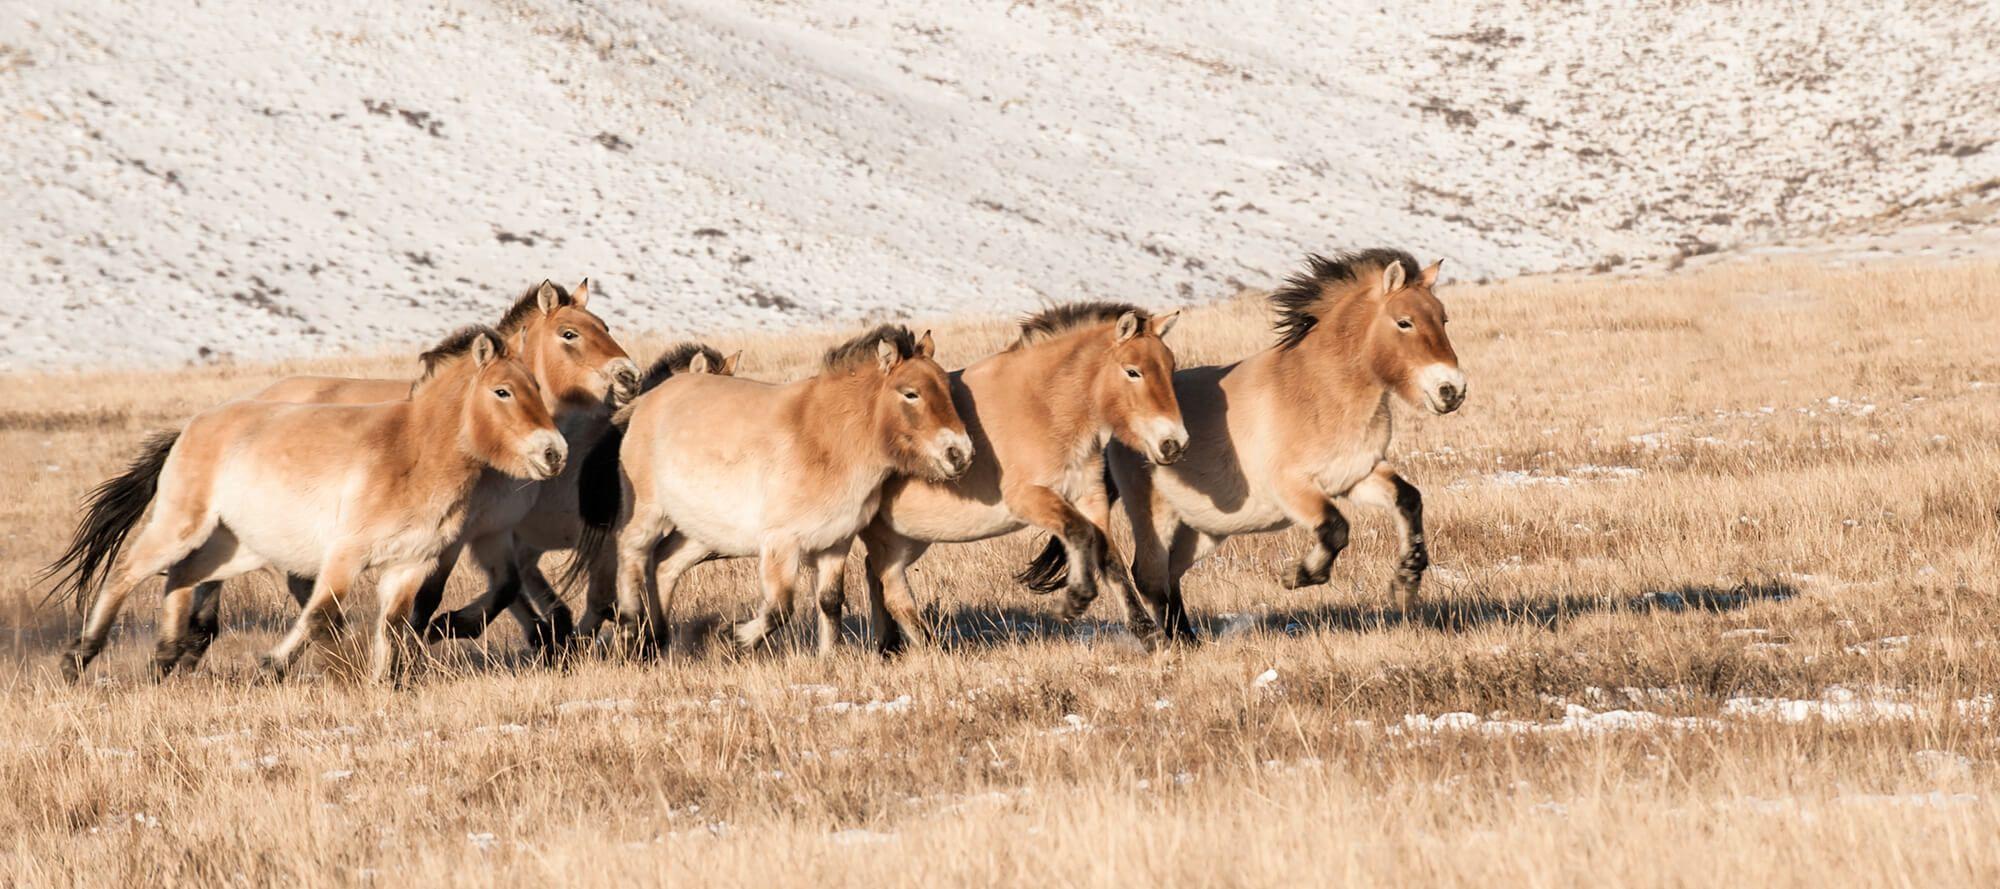 A herd of Przewalski horses running together. Photographer: Astrid Harrisson. Location: Mongolia.